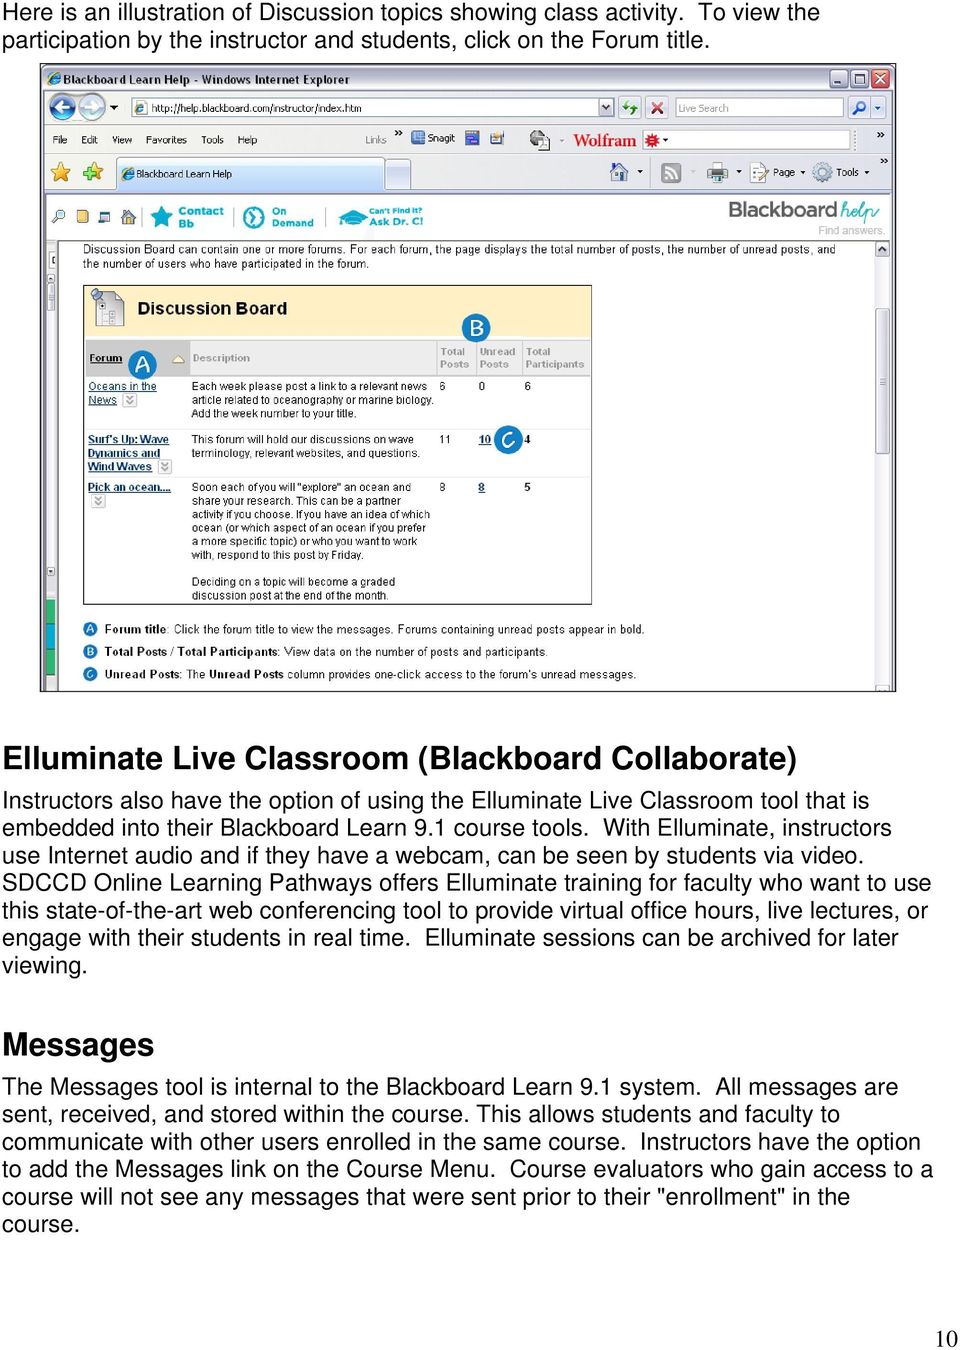 With Elluminate, instructors use Internet audio and if they have a webcam, can be seen by students via video.